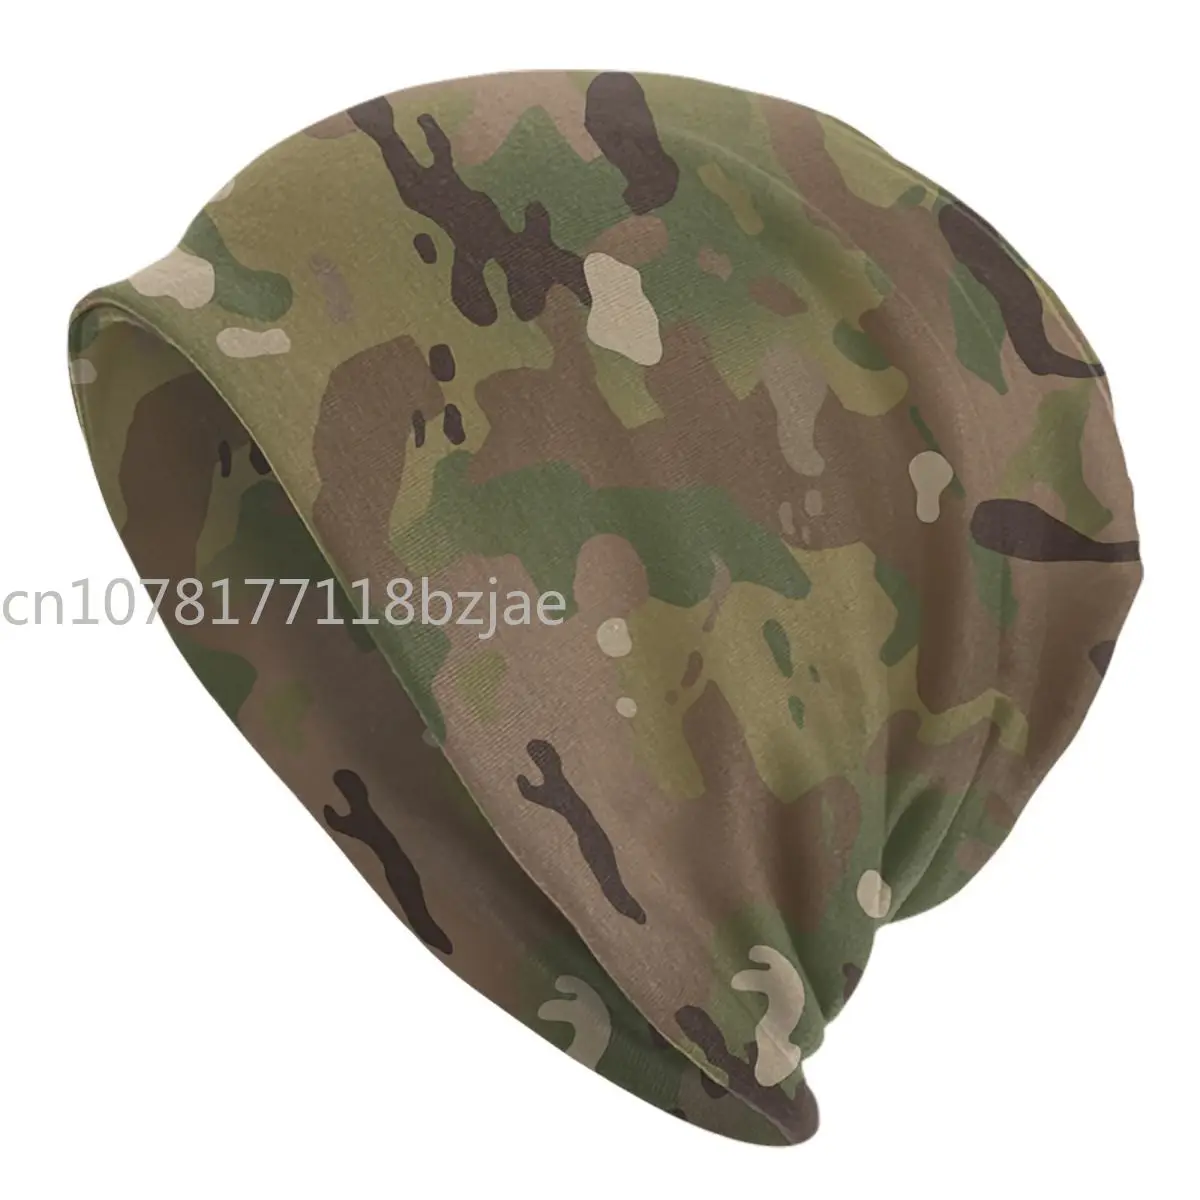 

Military Camo Camouflage Army Bonnet Hats Cool Knitting Hat For Women Men Winter Warm Skullies Beanies Caps